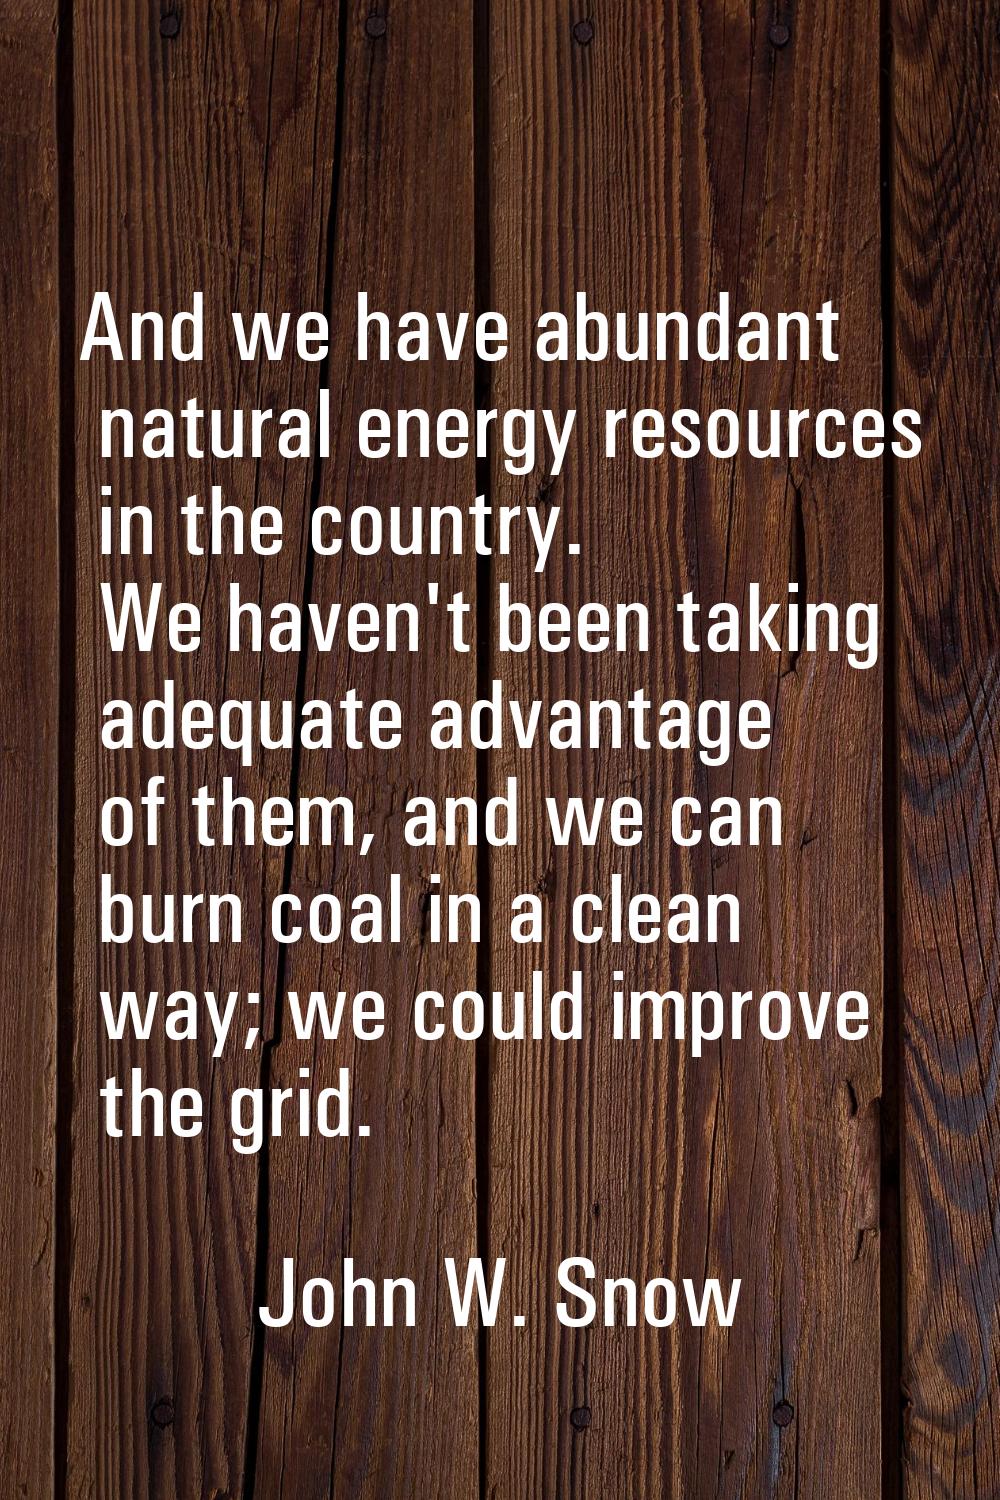 And we have abundant natural energy resources in the country. We haven't been taking adequate advan